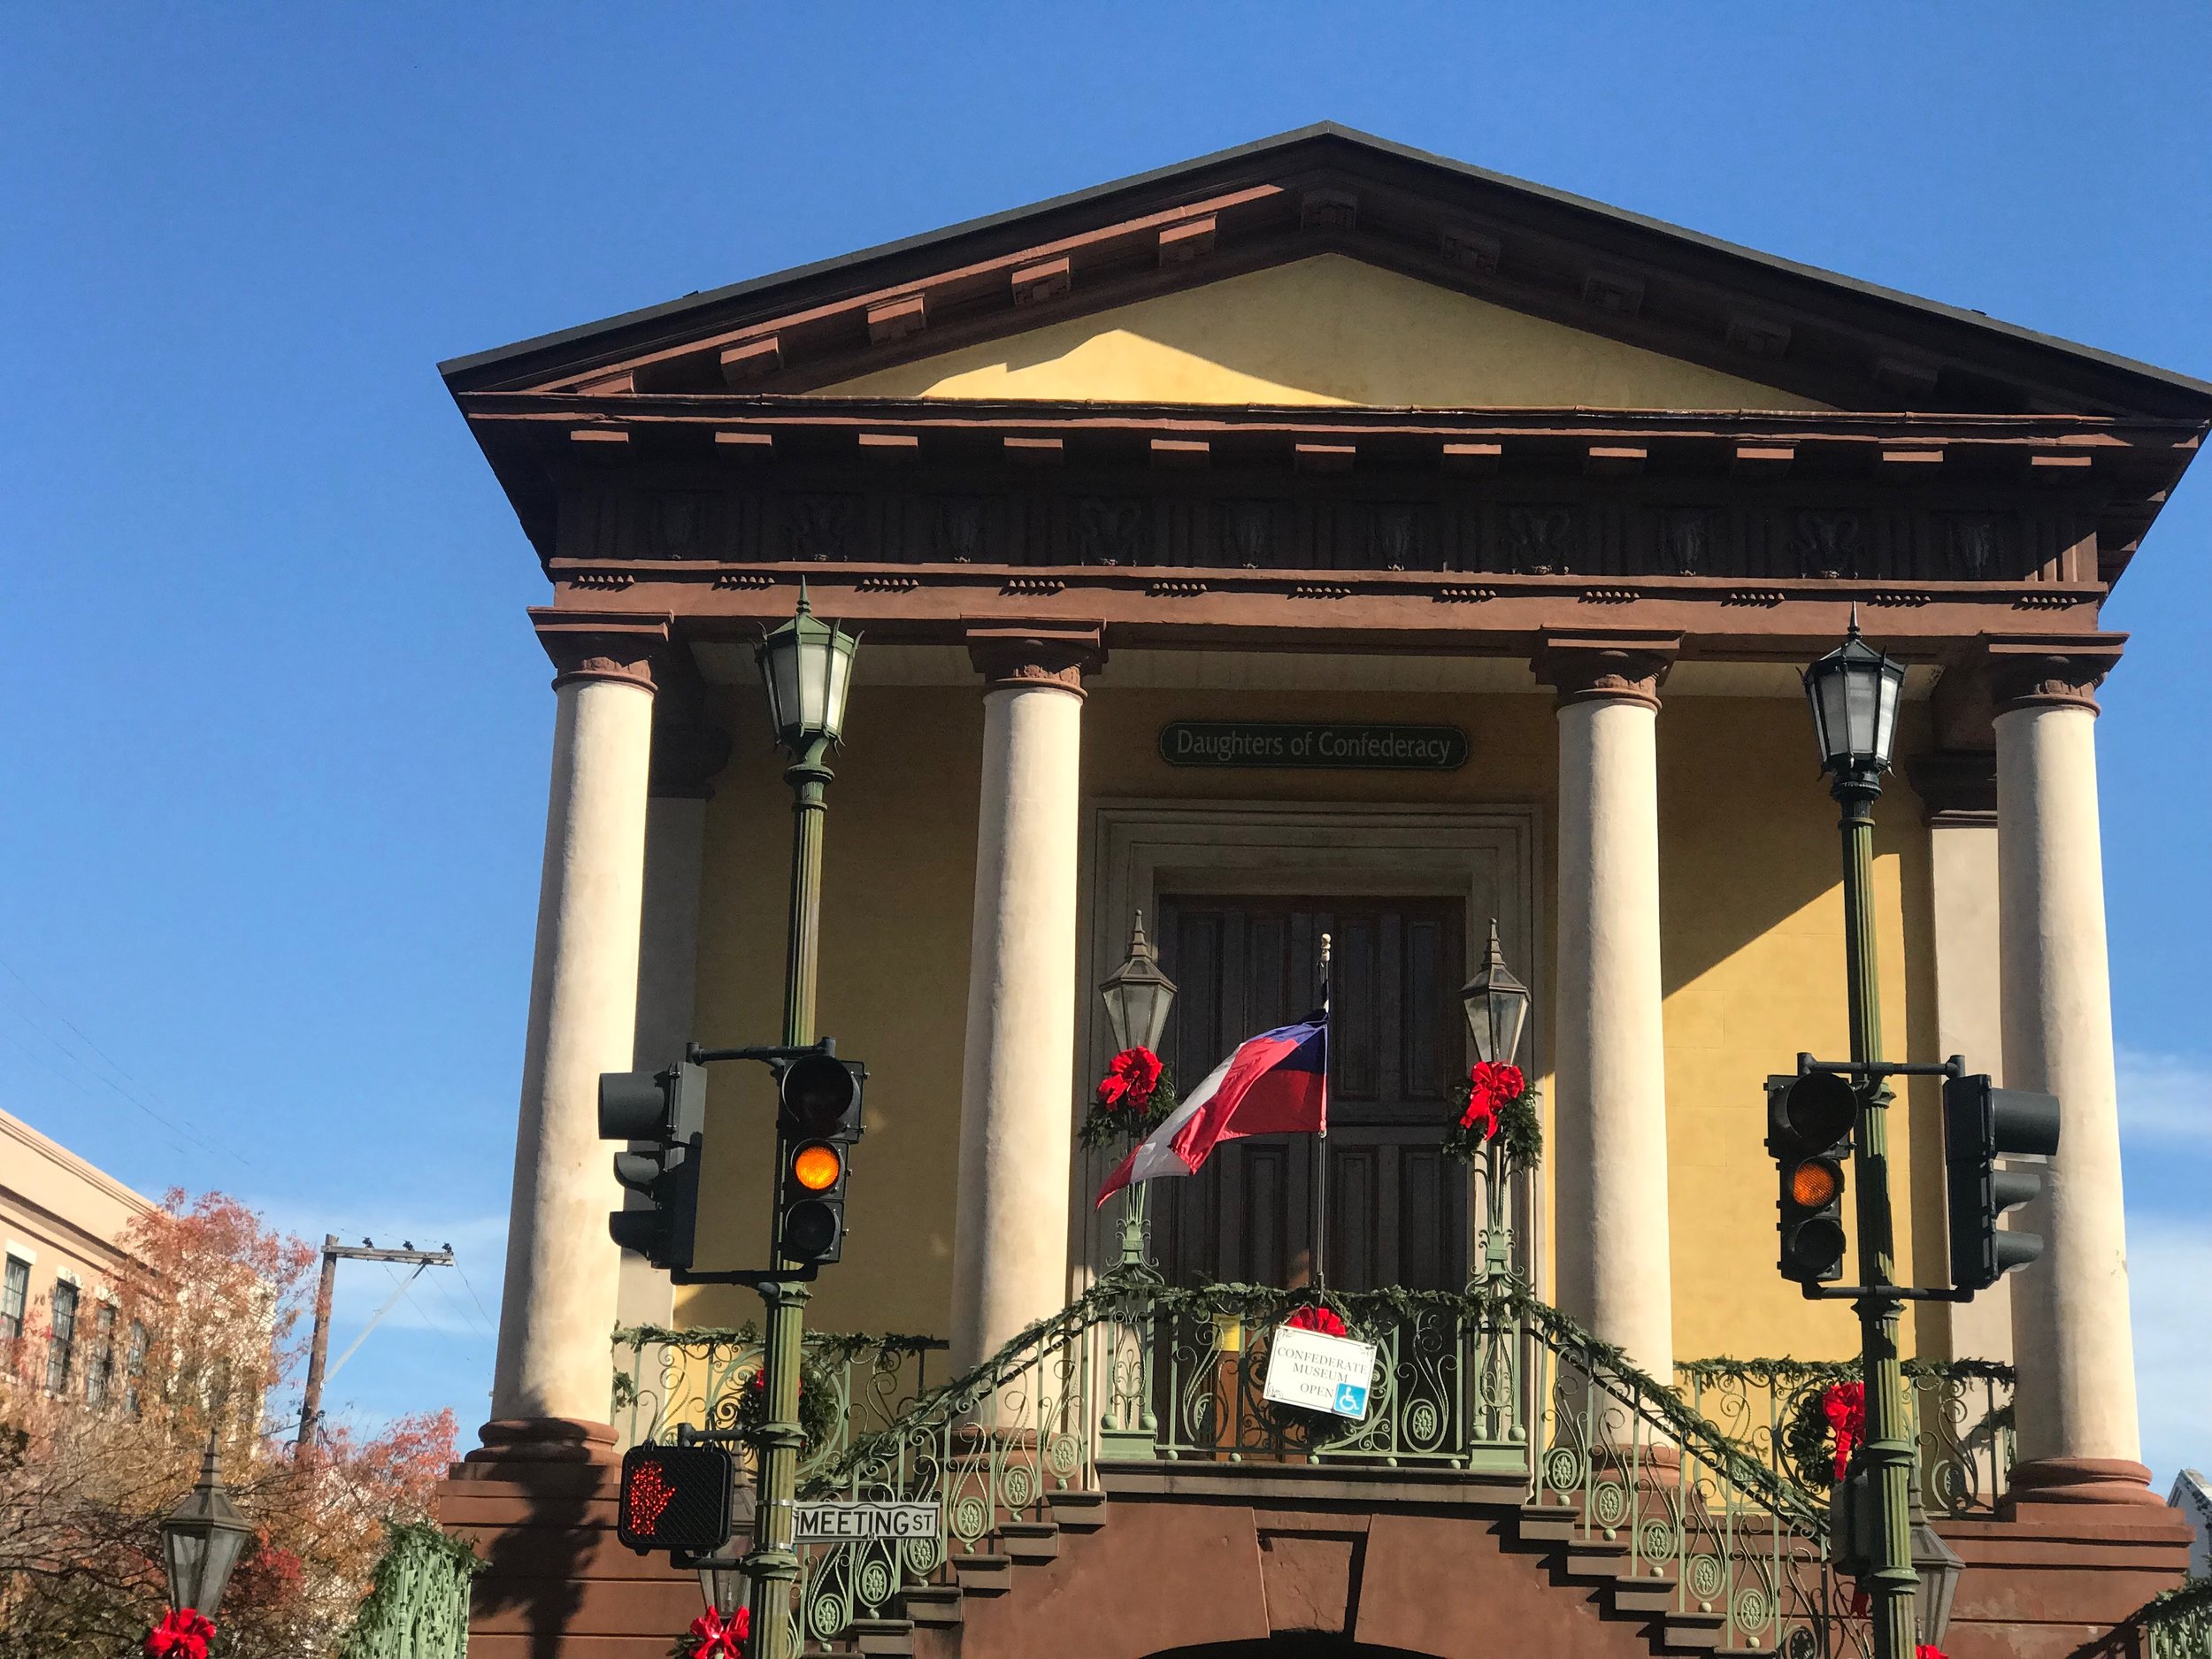  The Museum of the Confederacy, run by the Daughters of the Confederacy, sits upstairs in the historic Charleston Market building, built in 1841. 